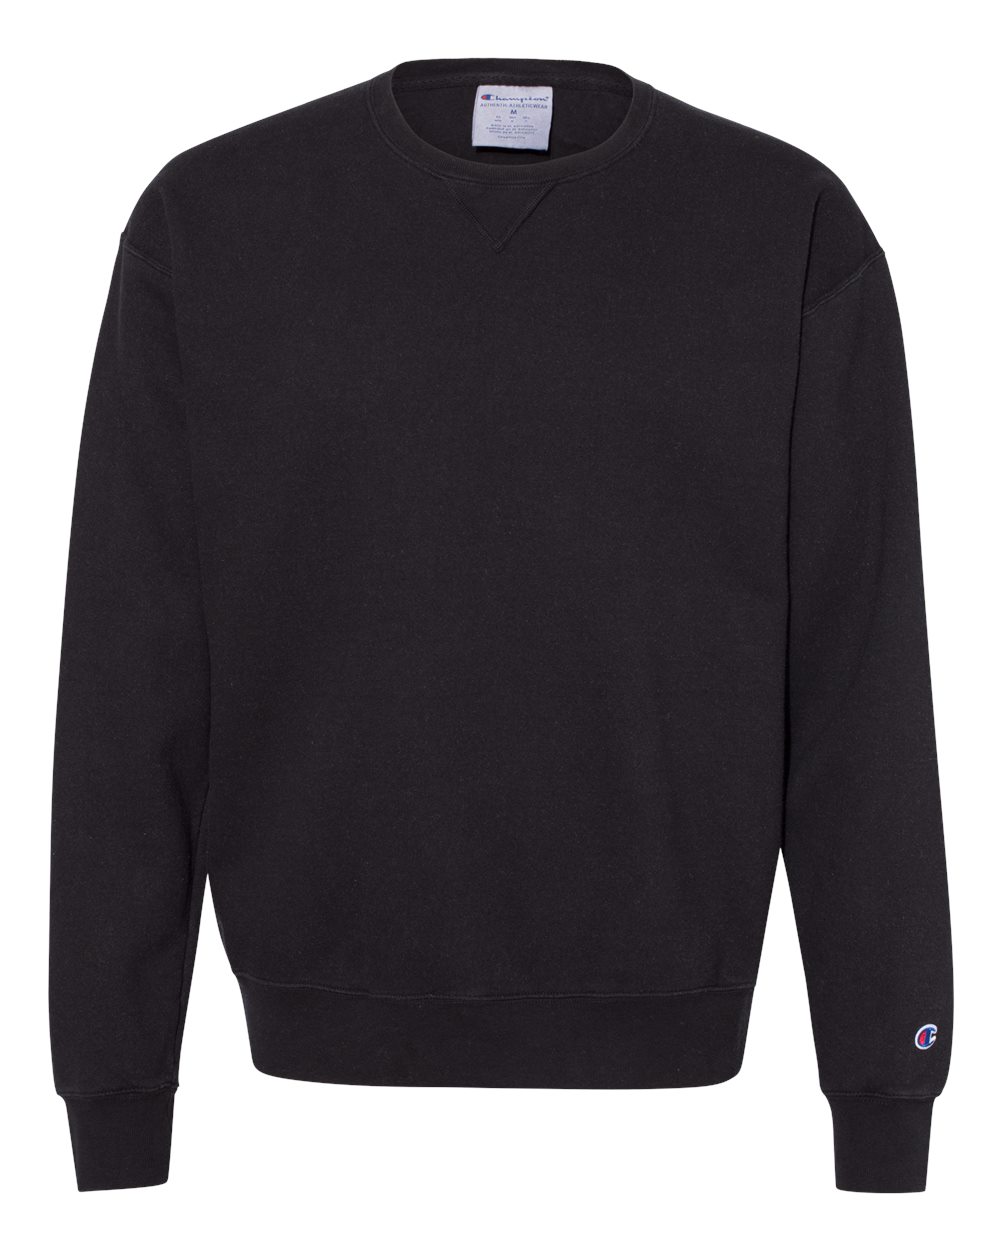 fully customizable champion garment dyed crewneck sweater for your brand in multiple colors